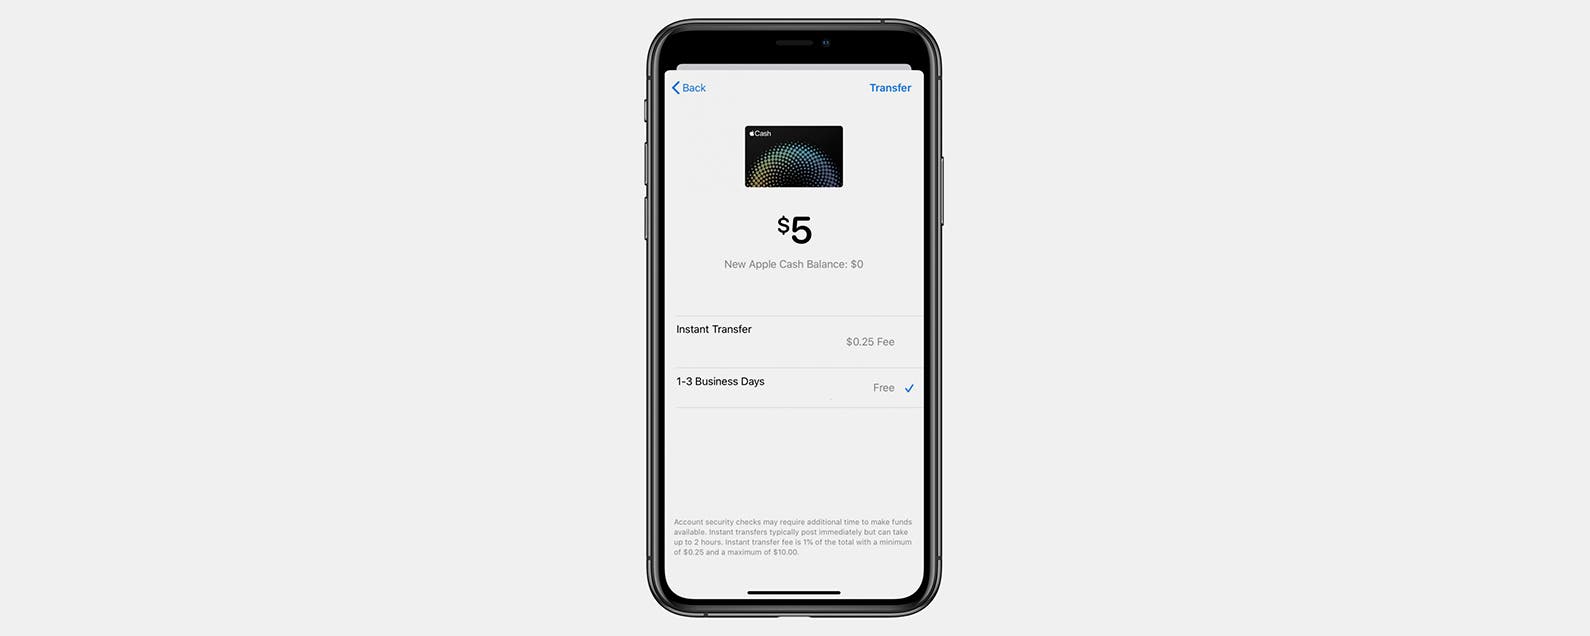 How To Transfer Money From Apple Pay